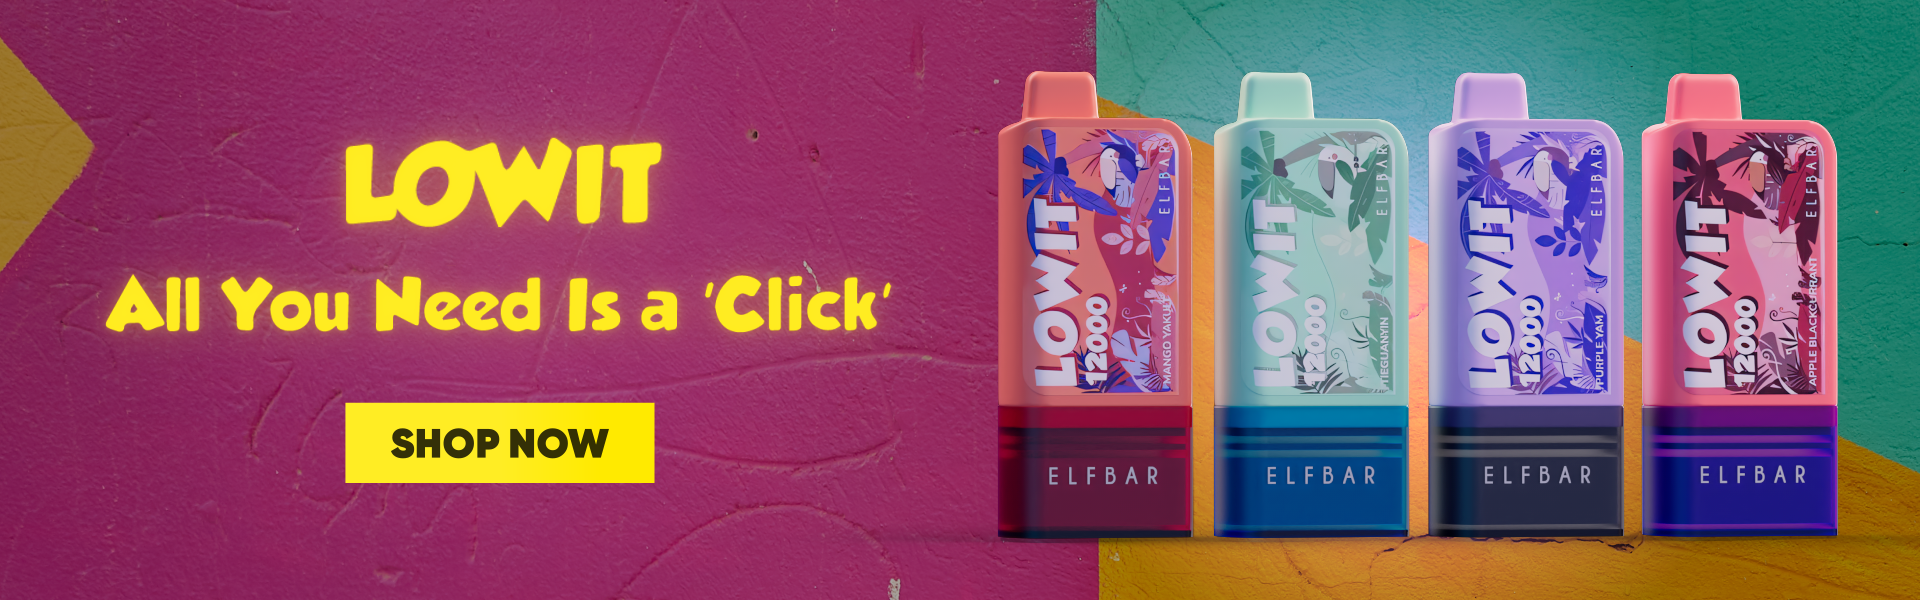 https://gaupanmv.com/product-category/disposable-pod/elfbar-lowit-12k/